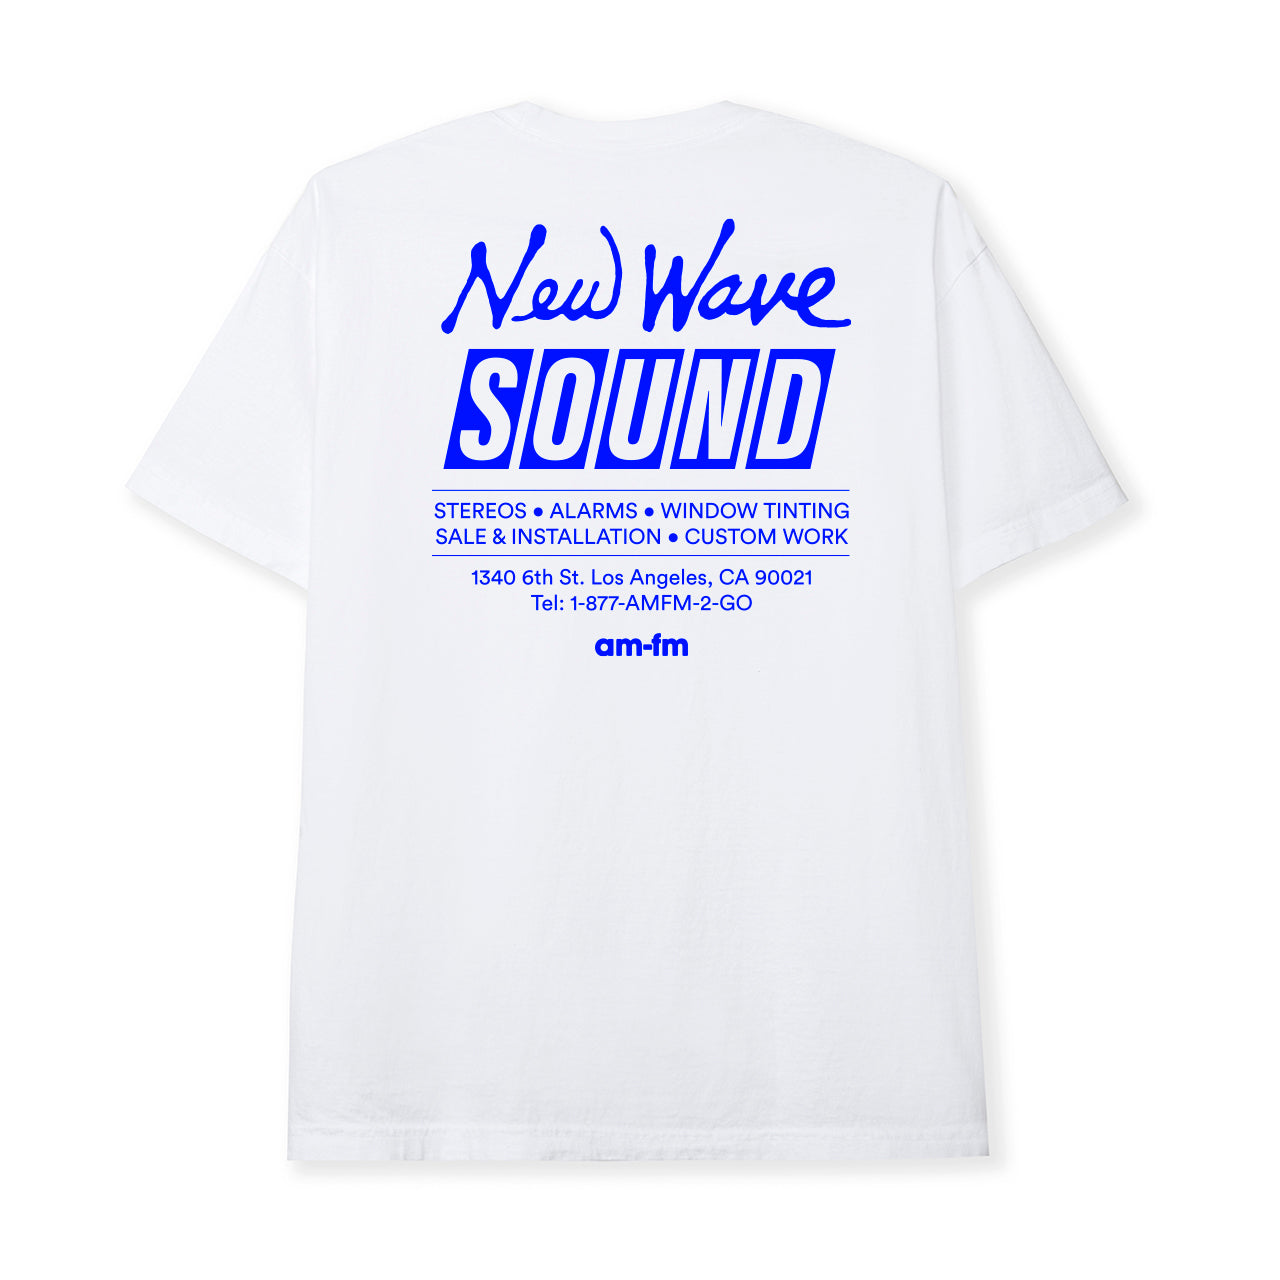 NEW WAVE TEE - WHITE